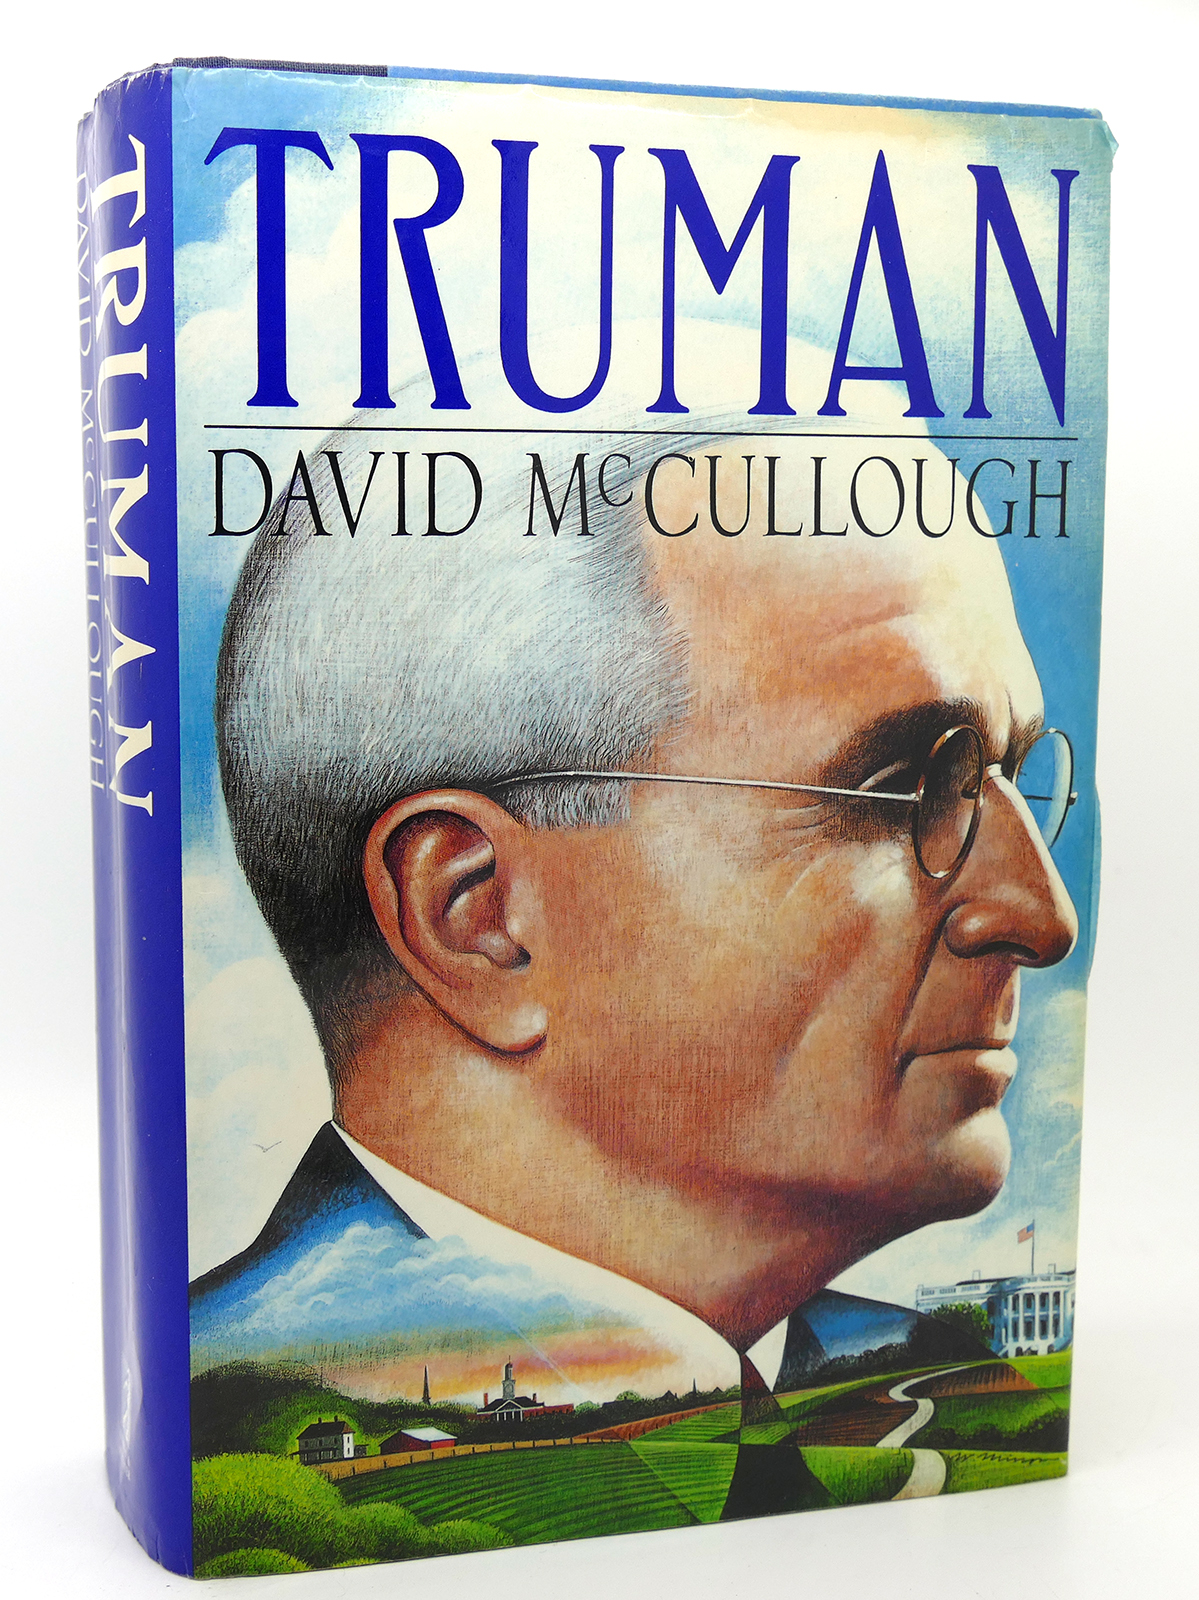 TRUMAN by David McCullough Hardcover (1992) First Edition; First